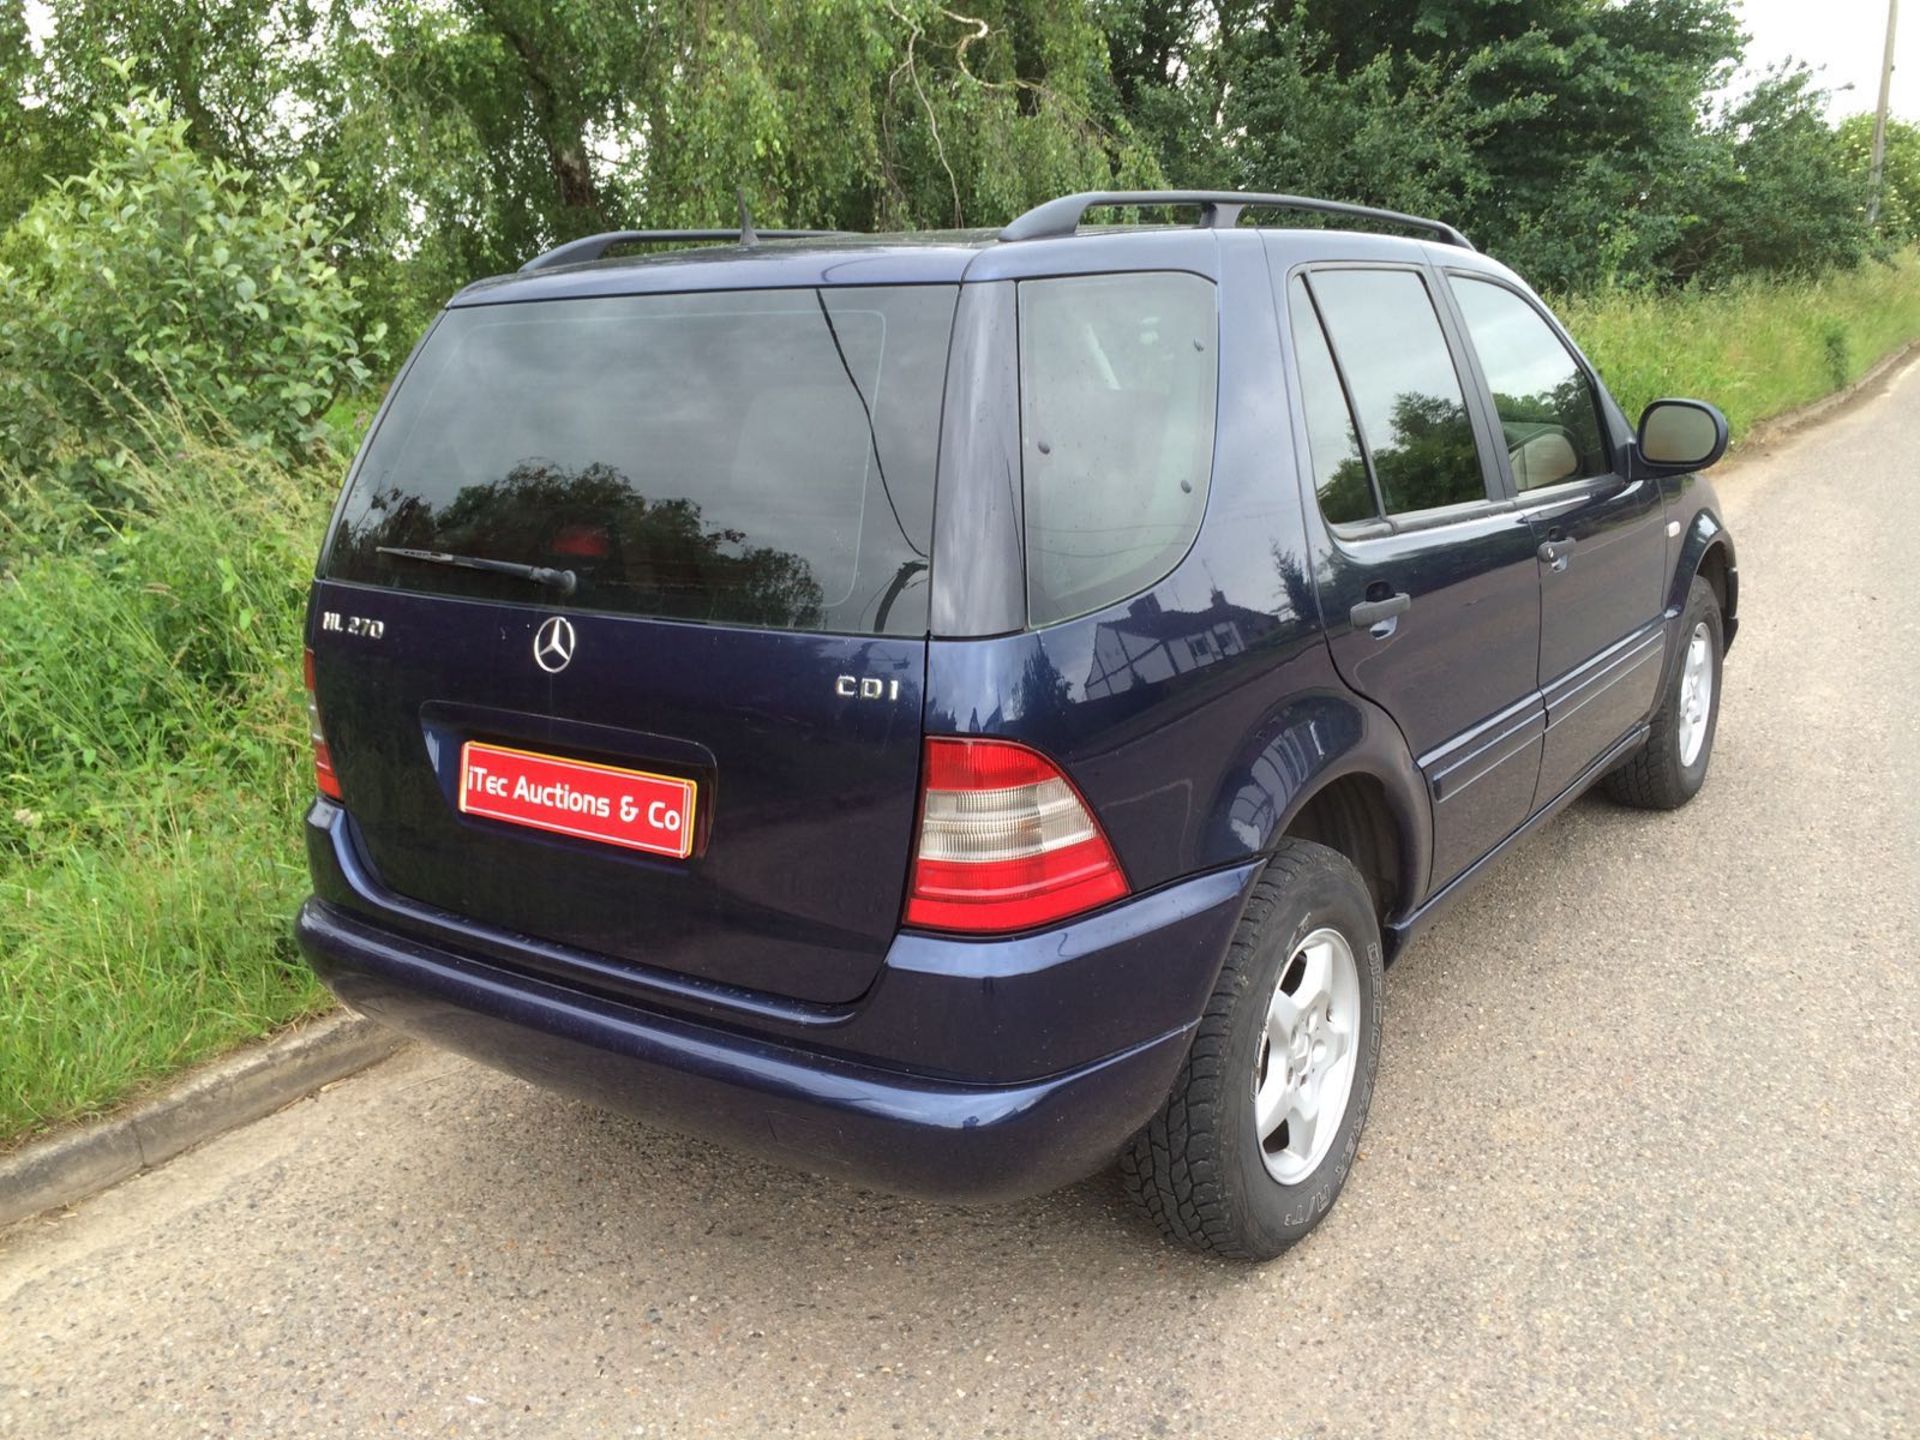 2000 MERCEDES BENZ ML270 CDI AUTO (7 SEATER) **NO VAT ON HAMMER PRICE** - Image 4 of 19